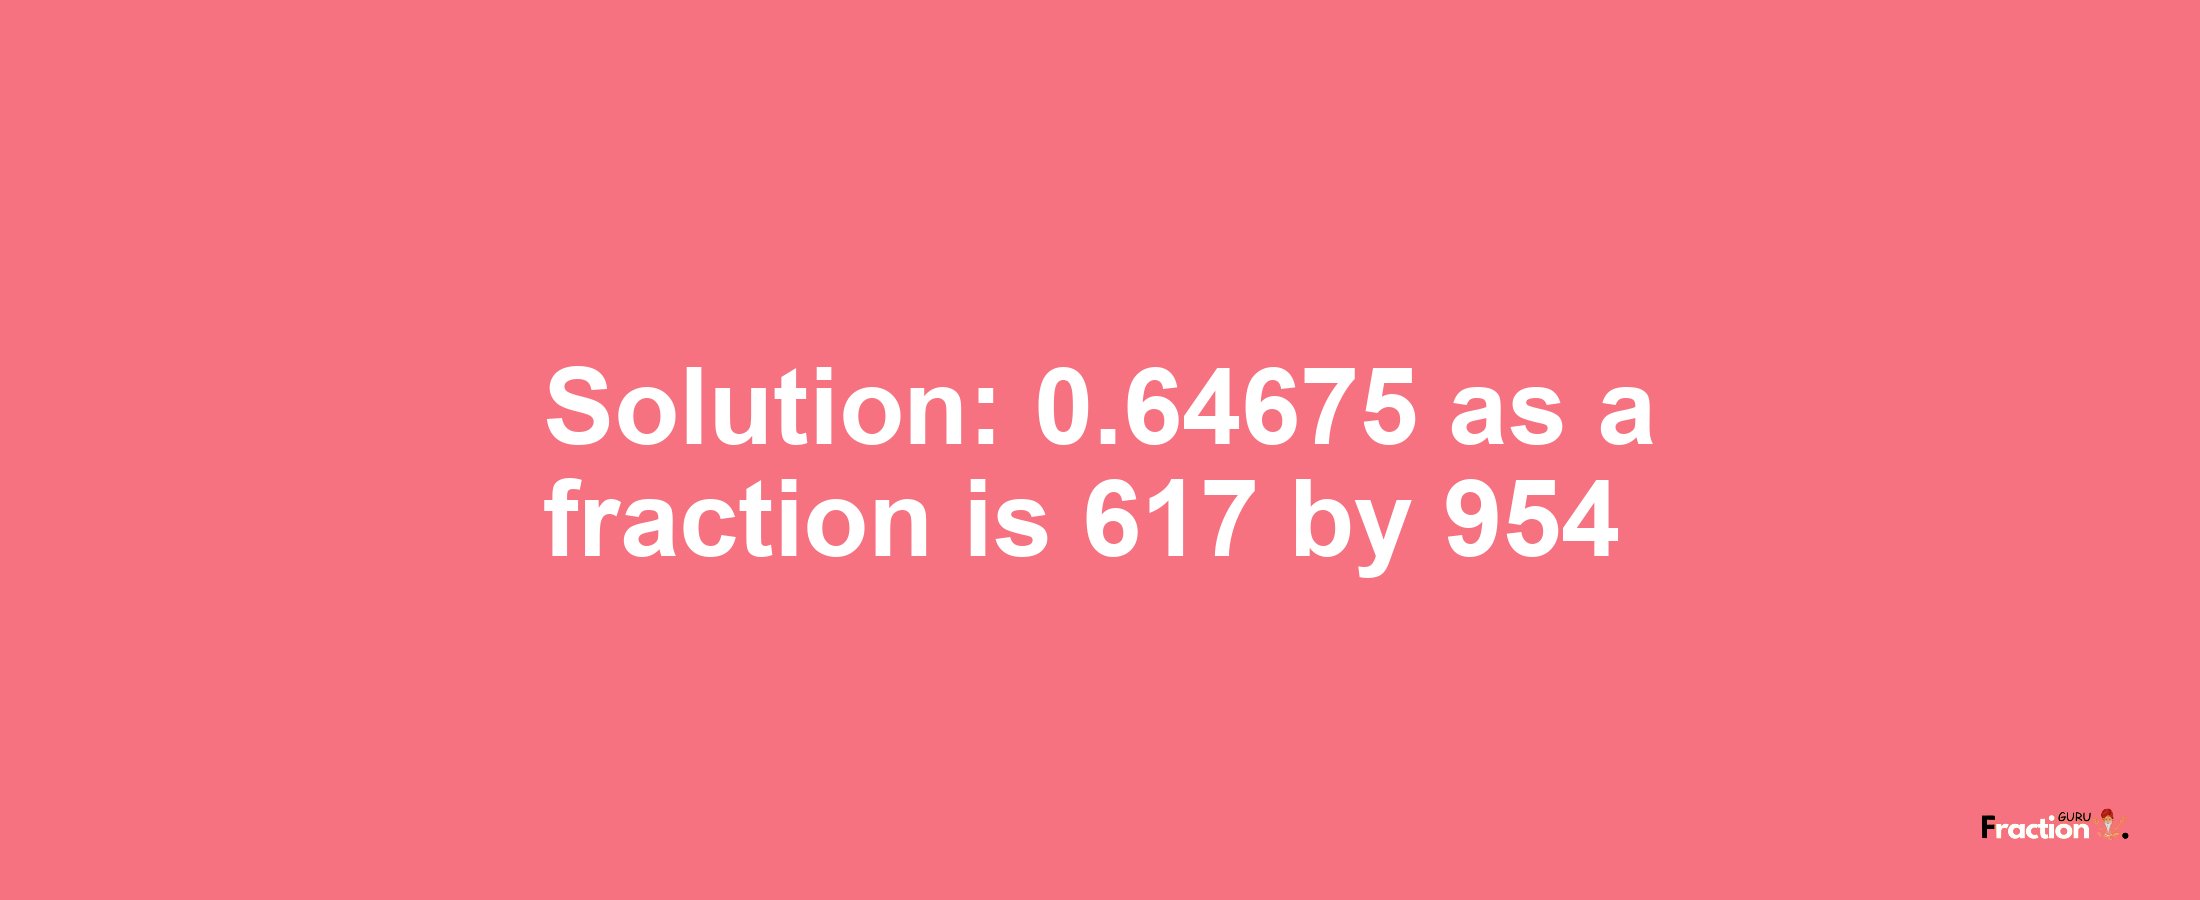 Solution:0.64675 as a fraction is 617/954